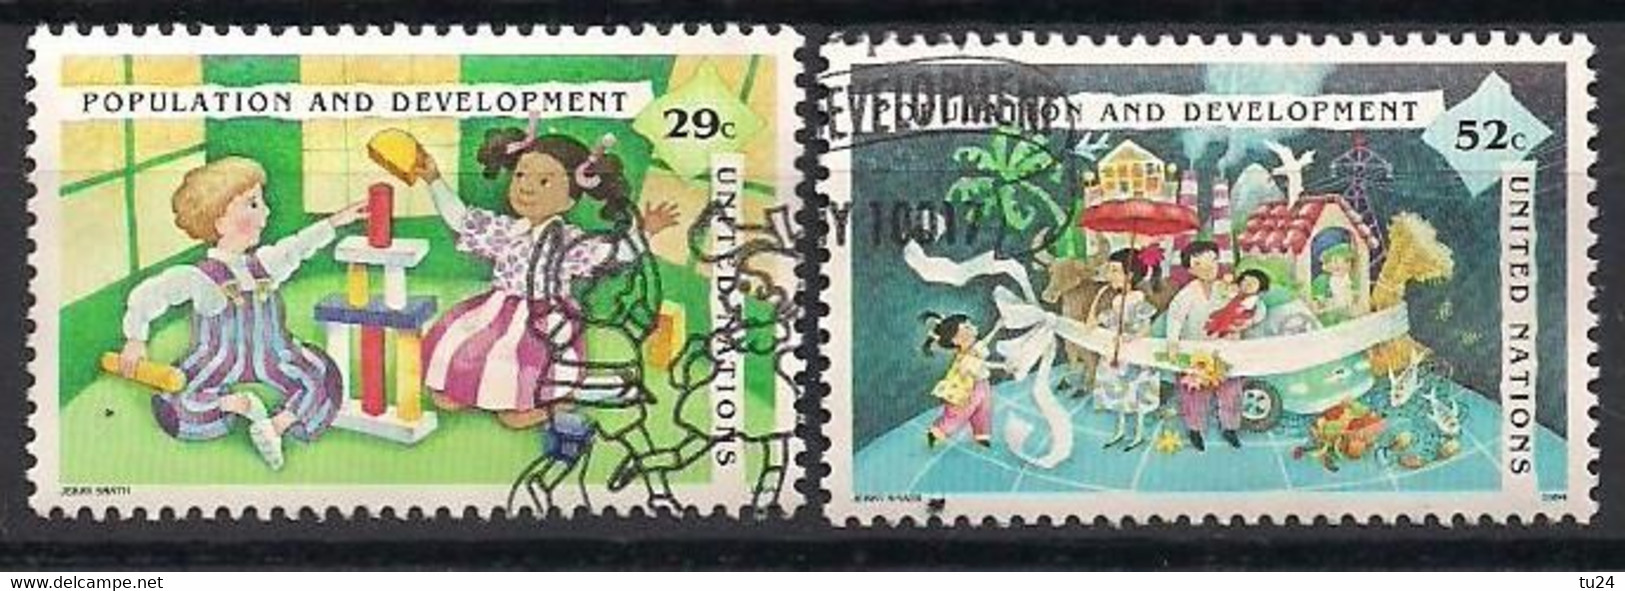 UNO  New York  (1994)  Mi.Nr.  675 + 676  Gest. / Used   (4ep06) - Used Stamps